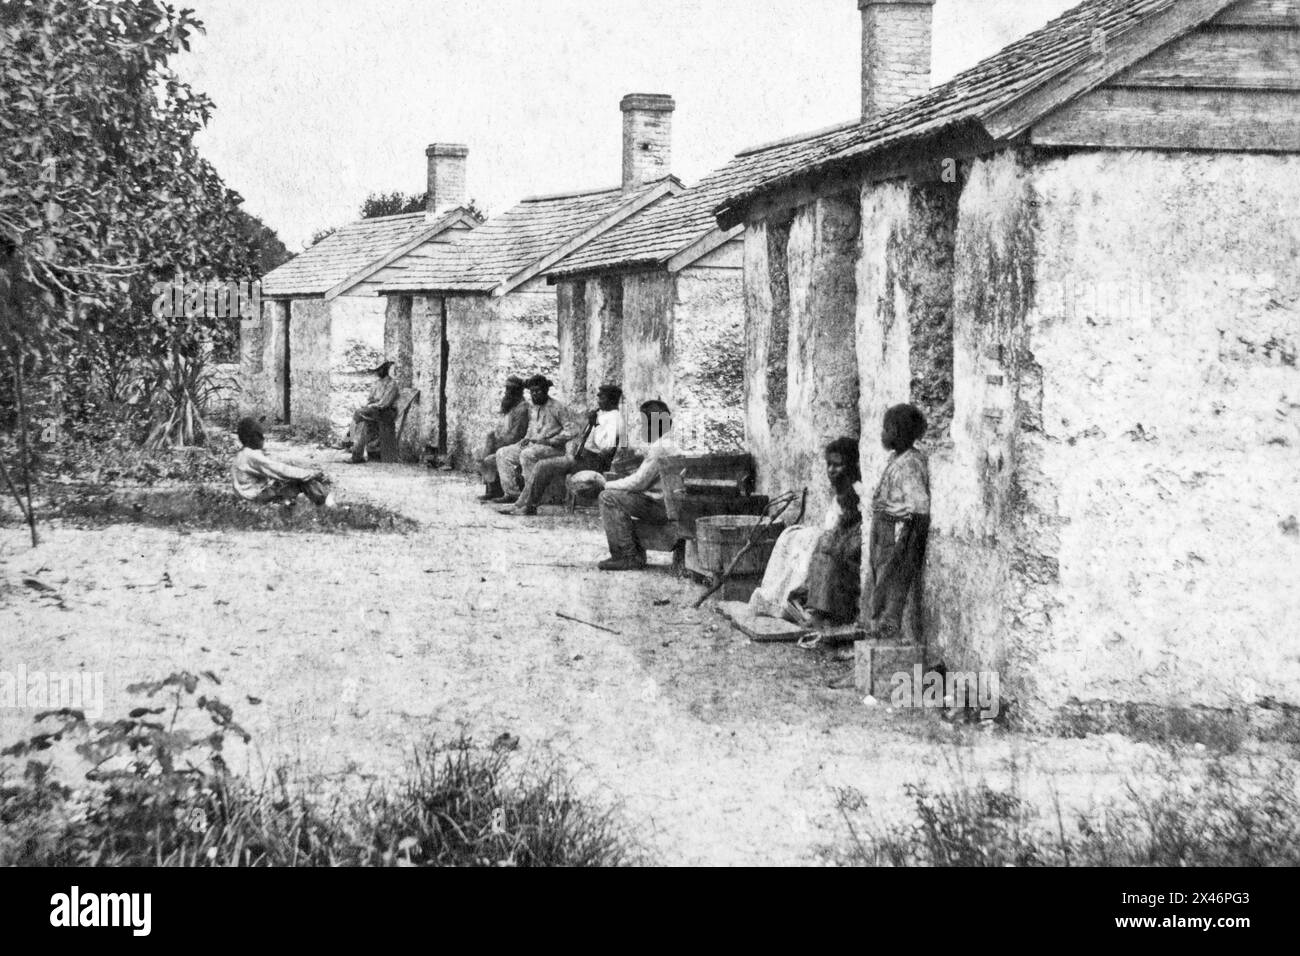 Quarters for former slaves, made of tabby concrete, at the Kingsley Plantation on Fort George Island in Jacksonville, Florida. (Photo c1880) Stock Photo